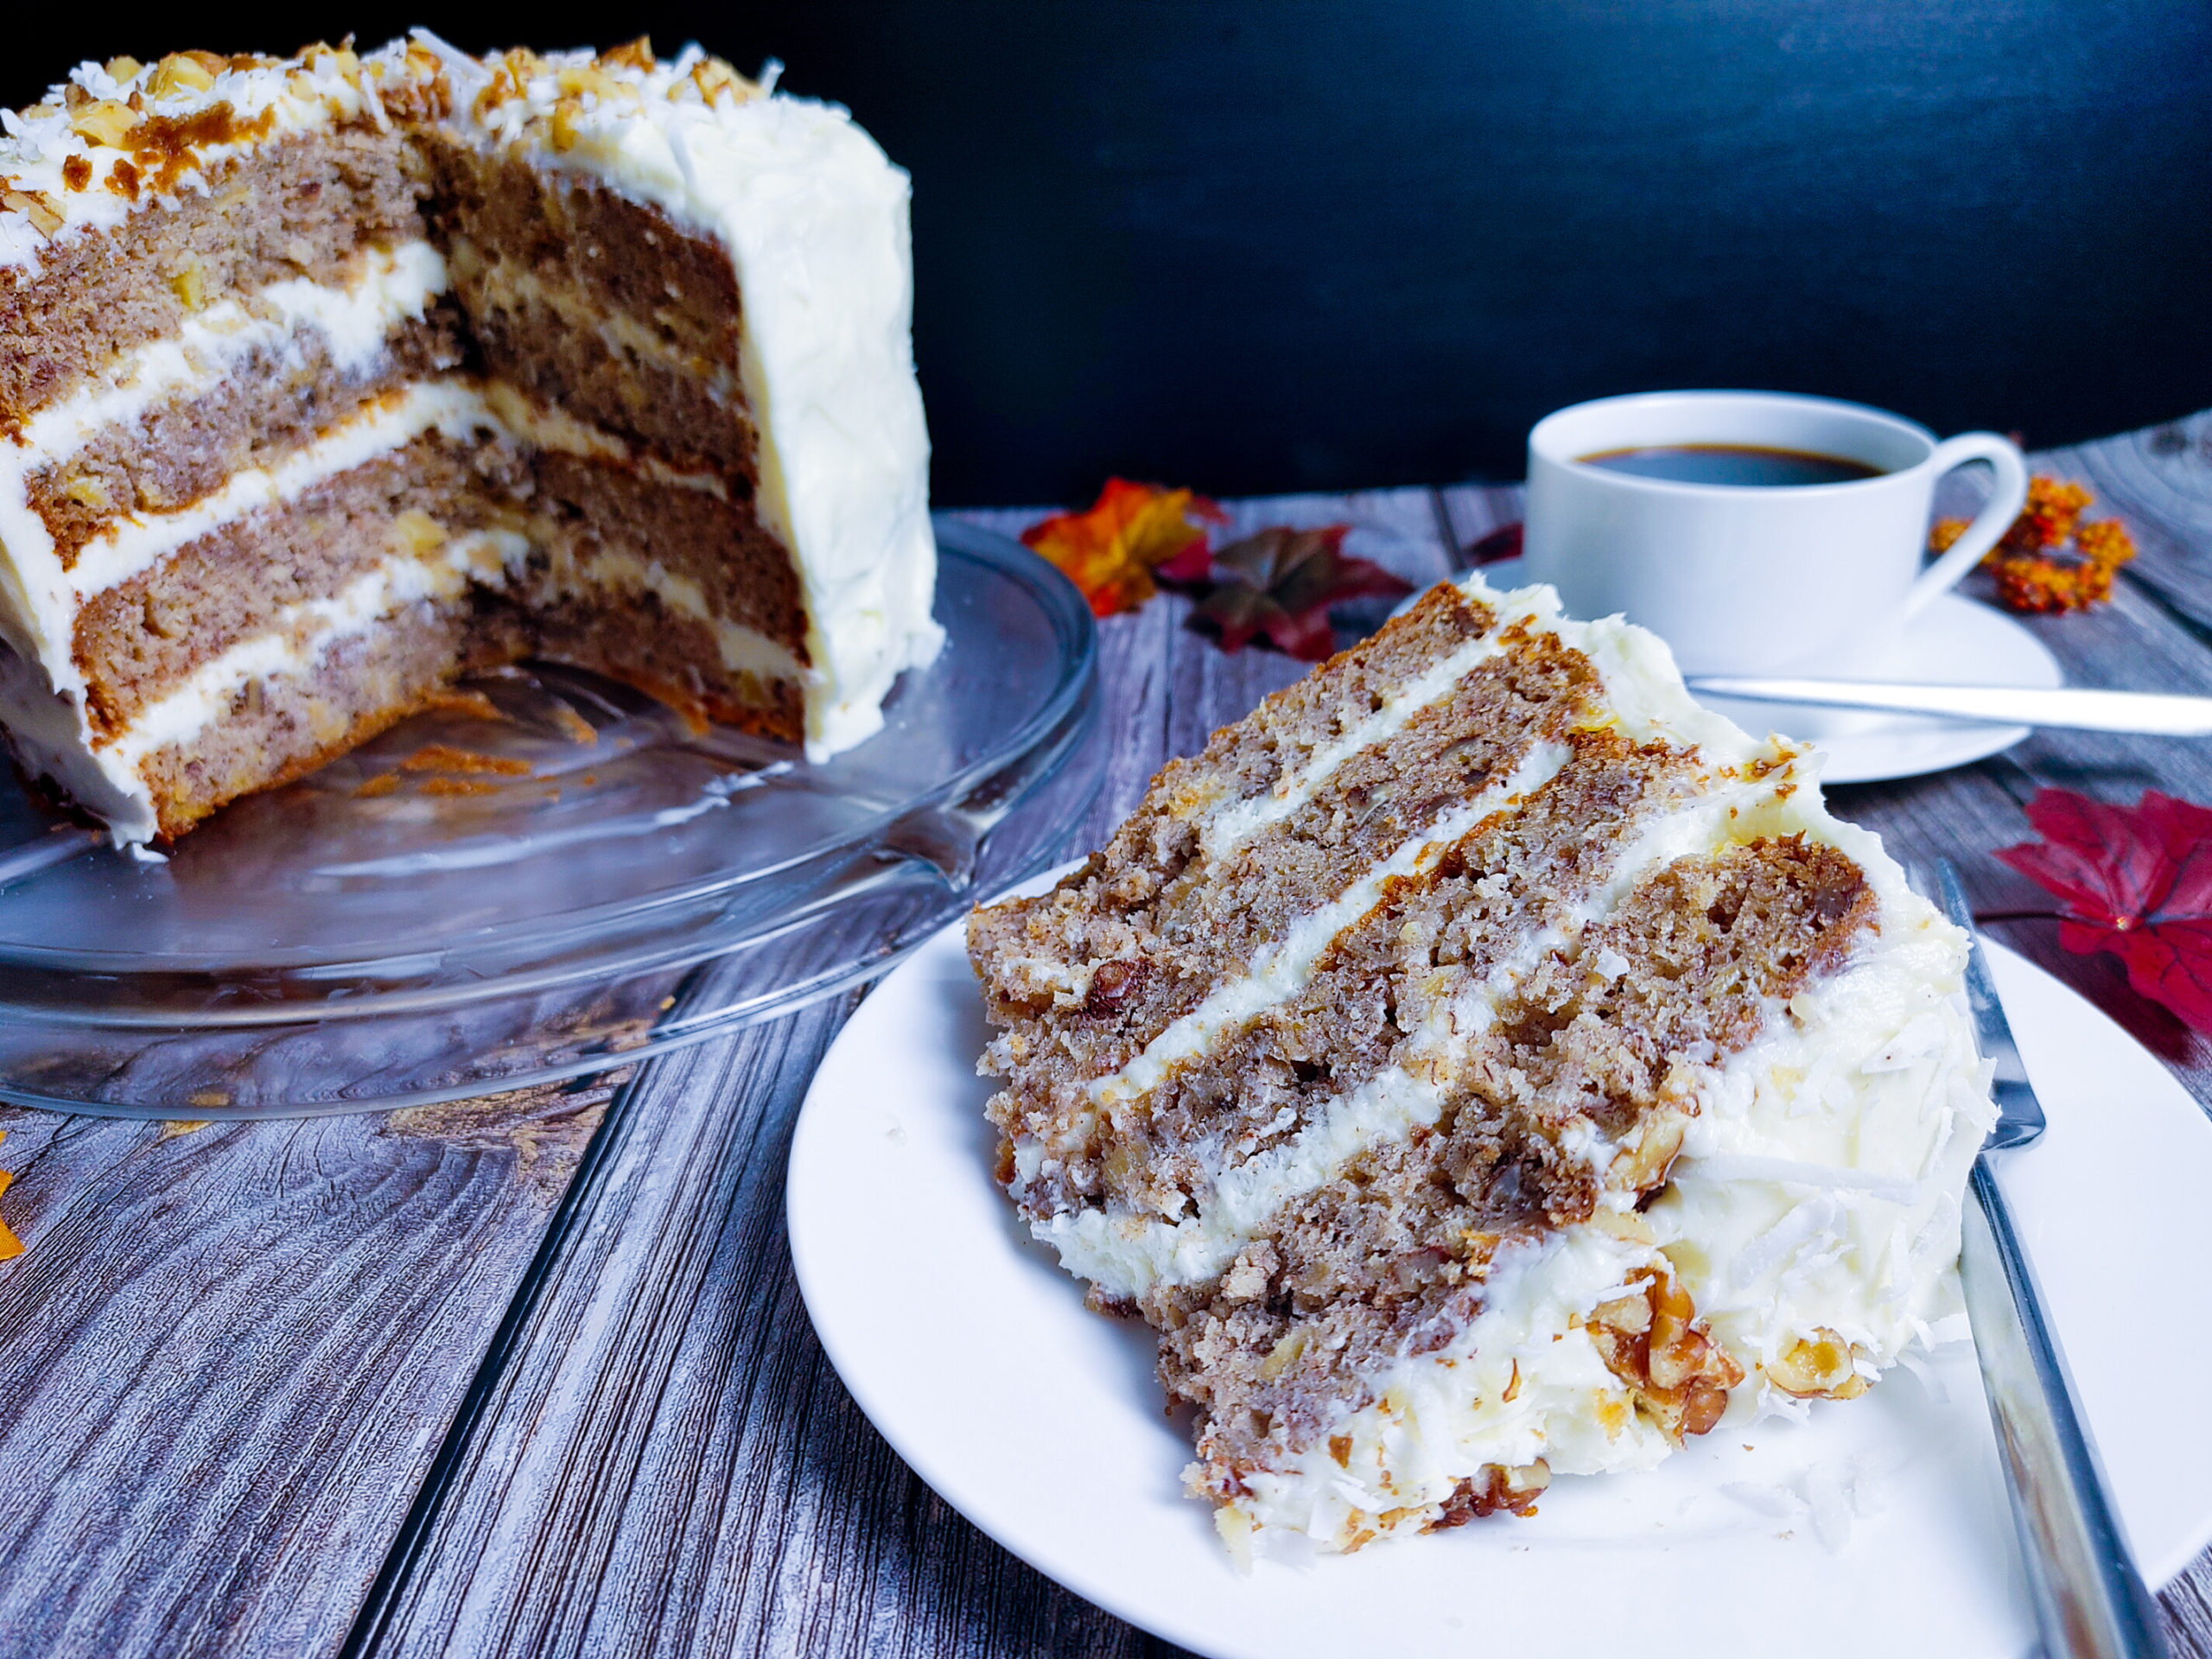 Best Banana Pineapple Cake with Cream Cheese Frosting